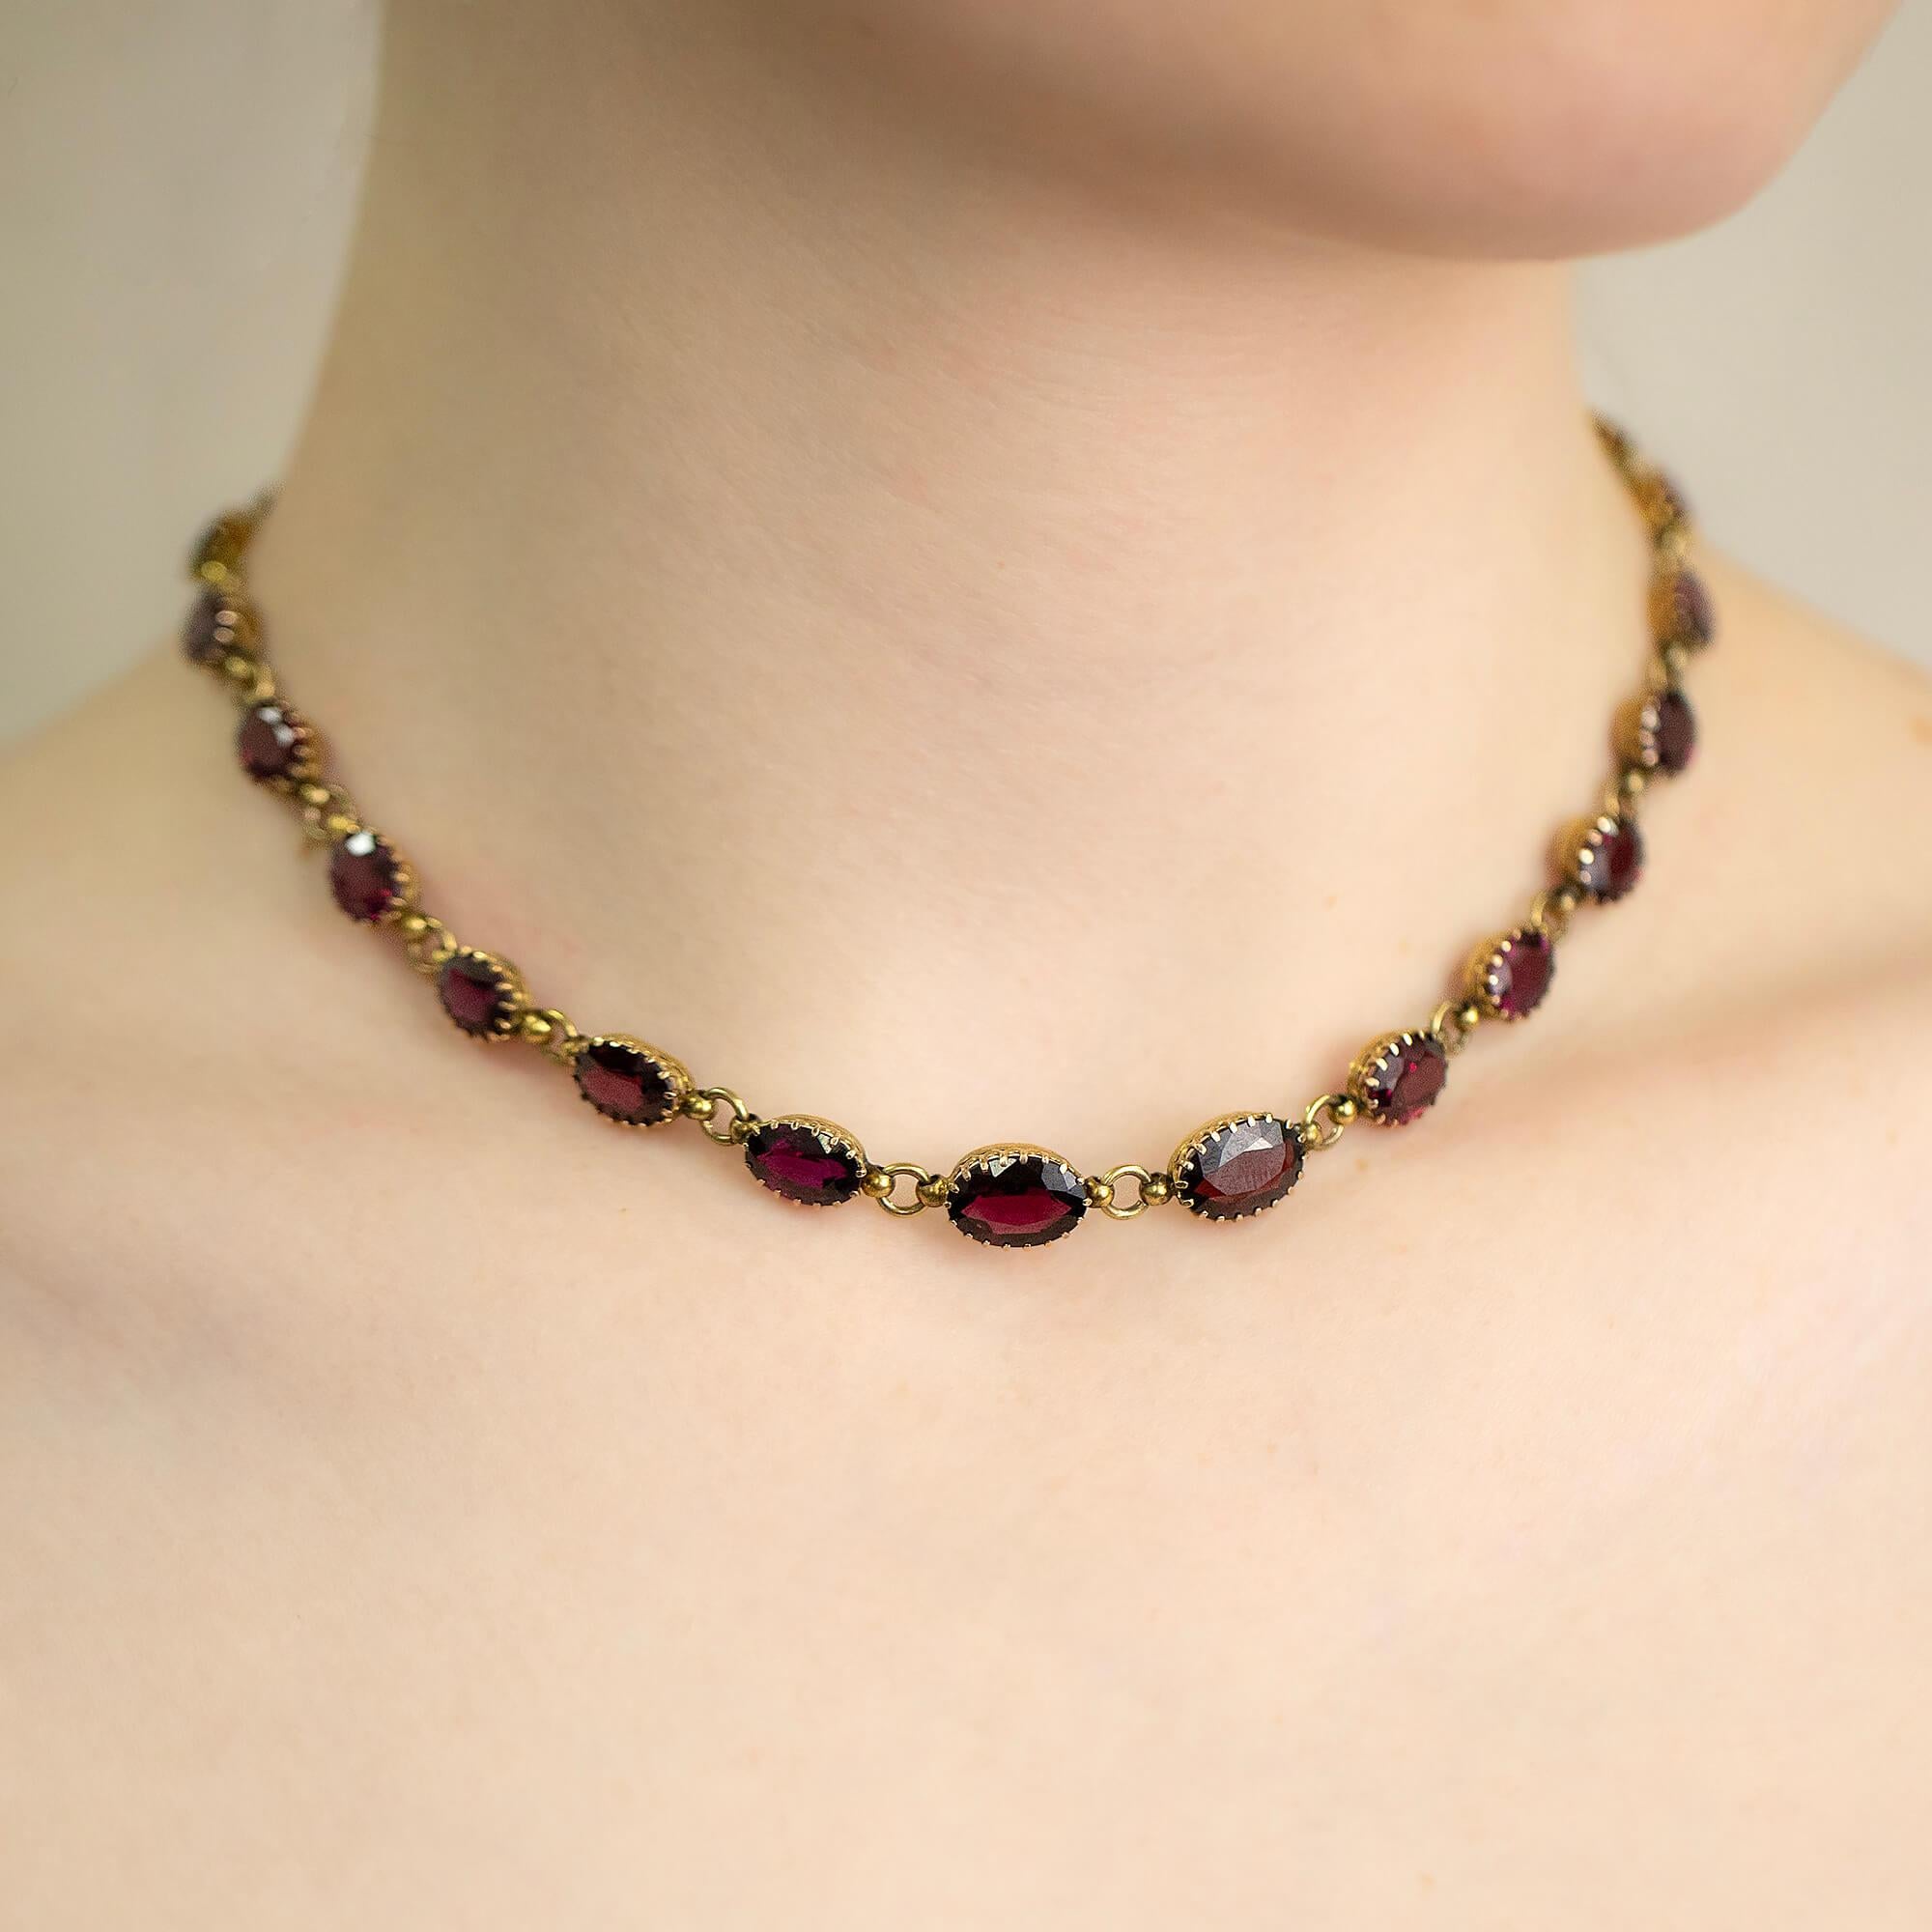 Late Victorian pyrandine oval garnet and gold link necklet. 
Each garnet is set in a claw oval coronet setting with a gold link between each setting. These settings are delicately interconnected, creating an extraordinarily flexible and adaptable